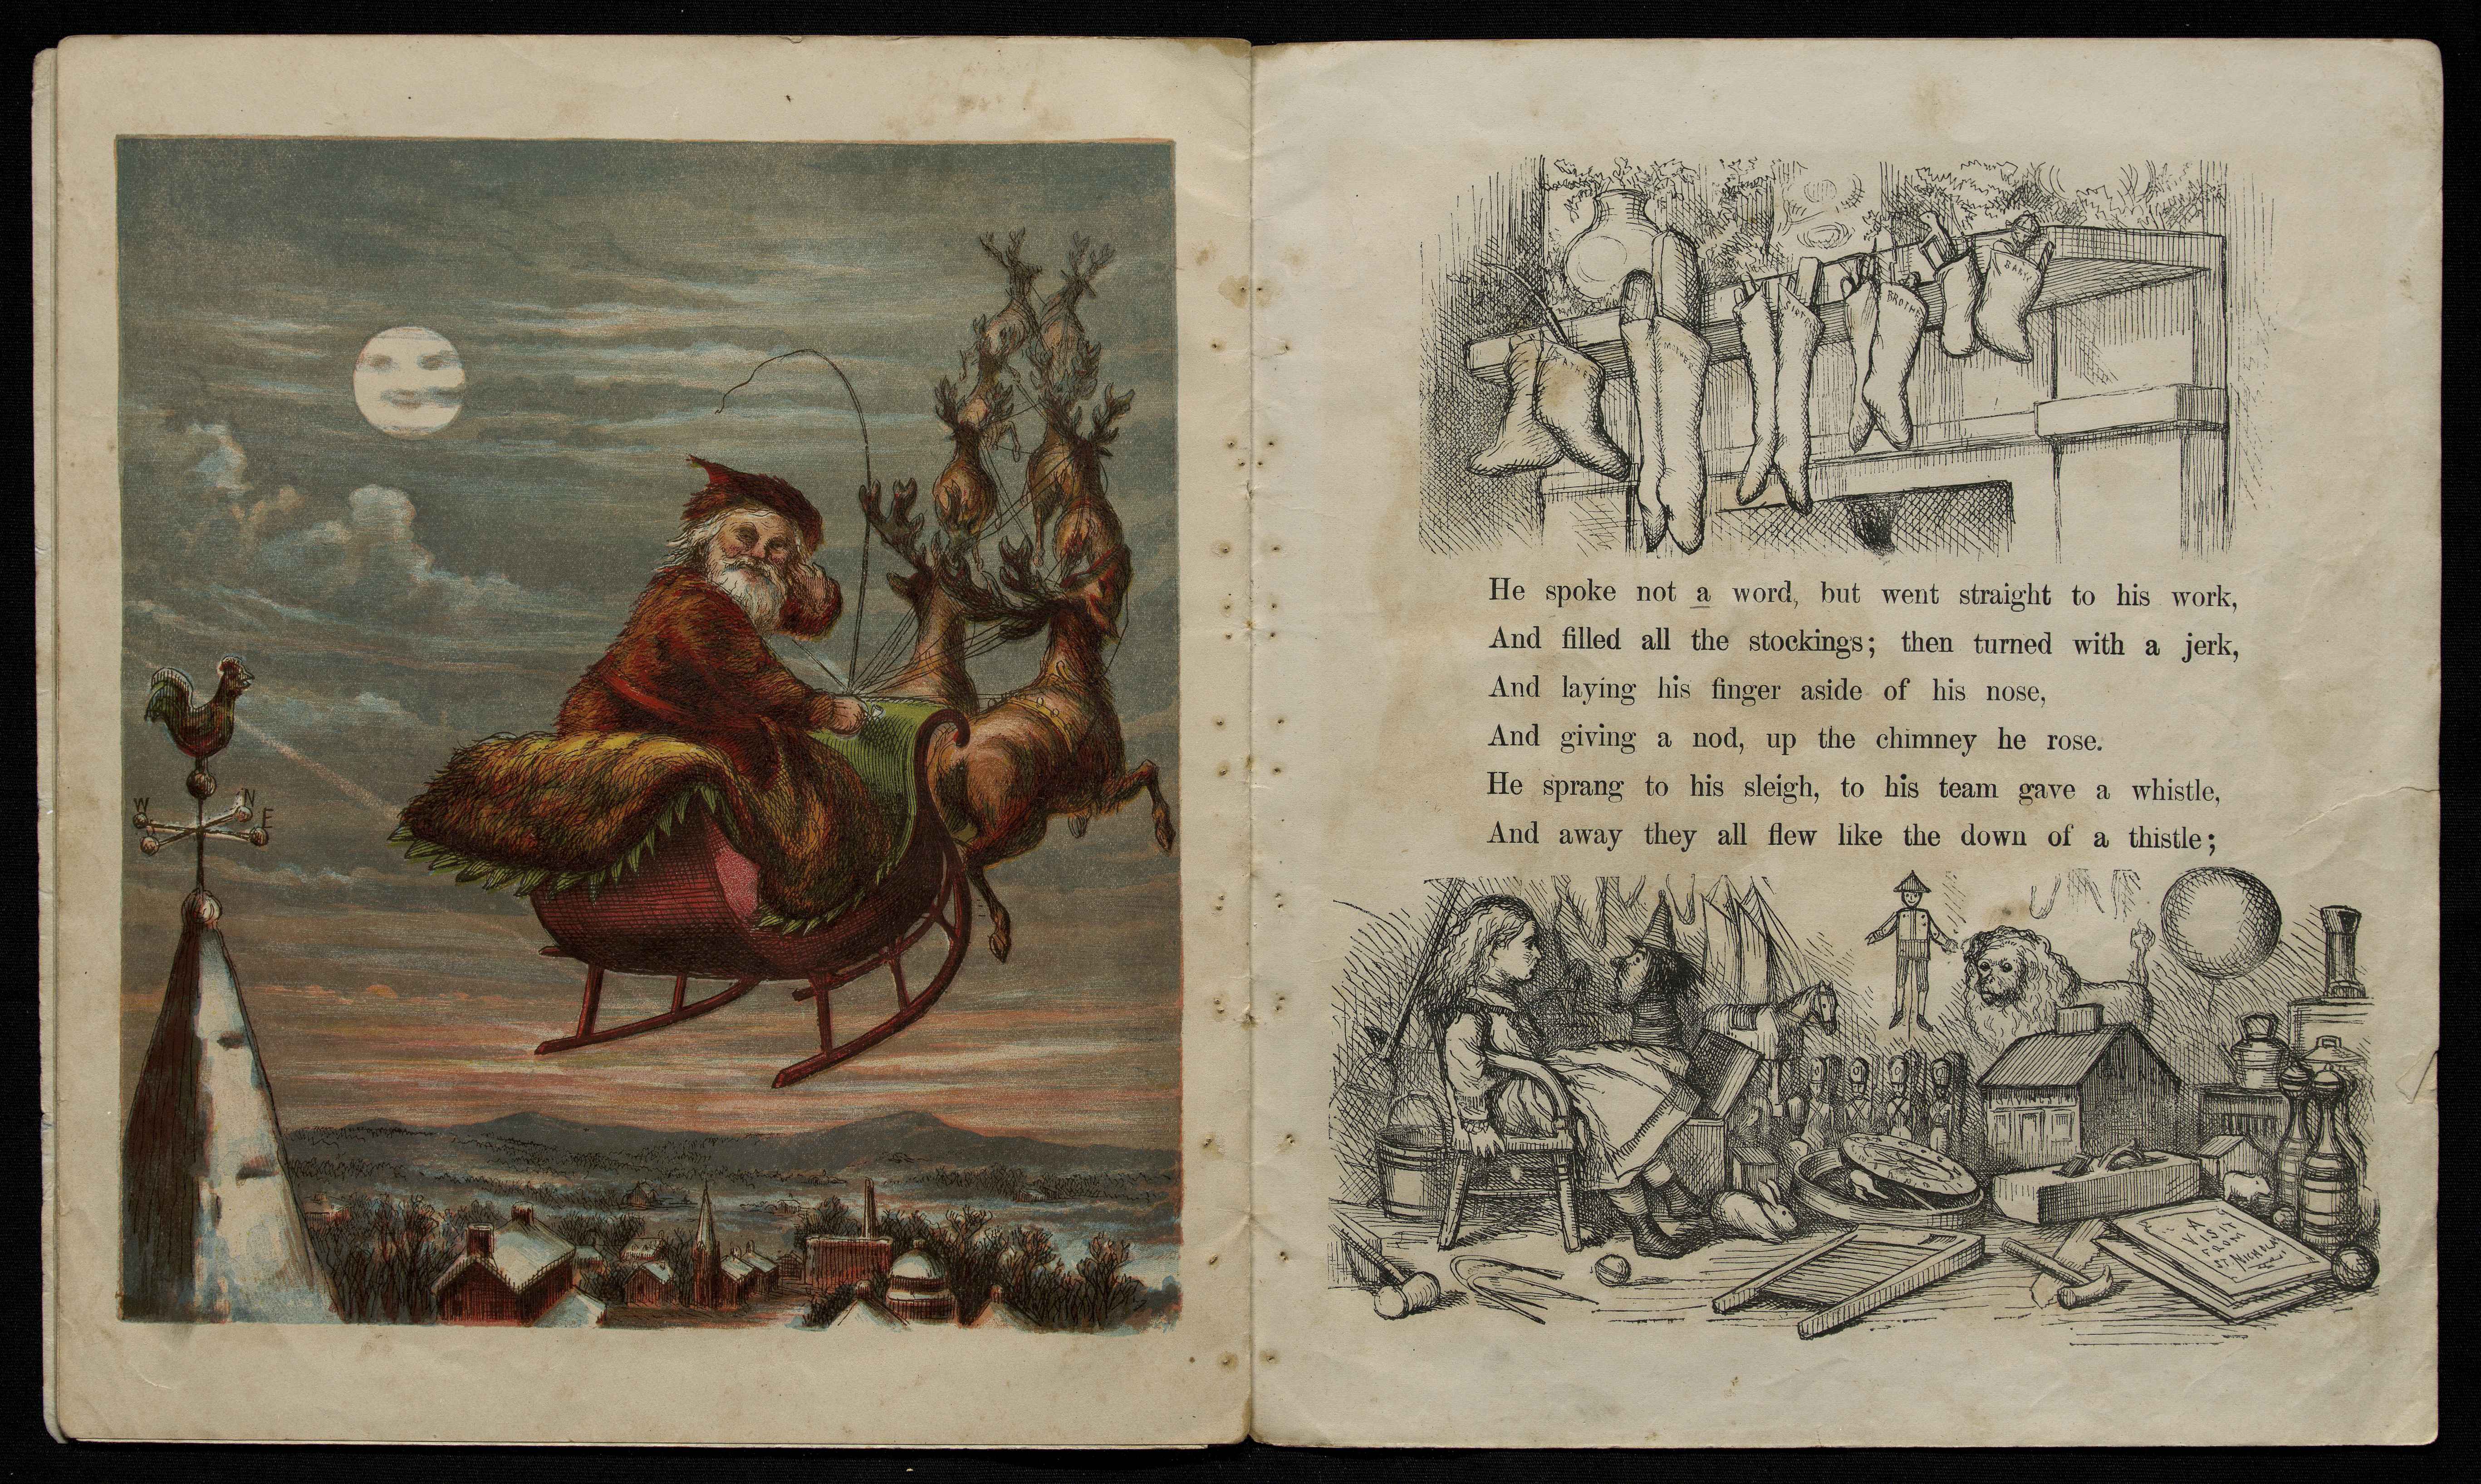 A Visit From St Nicholas, c.1869. Content compilation © 2020, by the American Antiquarian Society. All rights reserved.